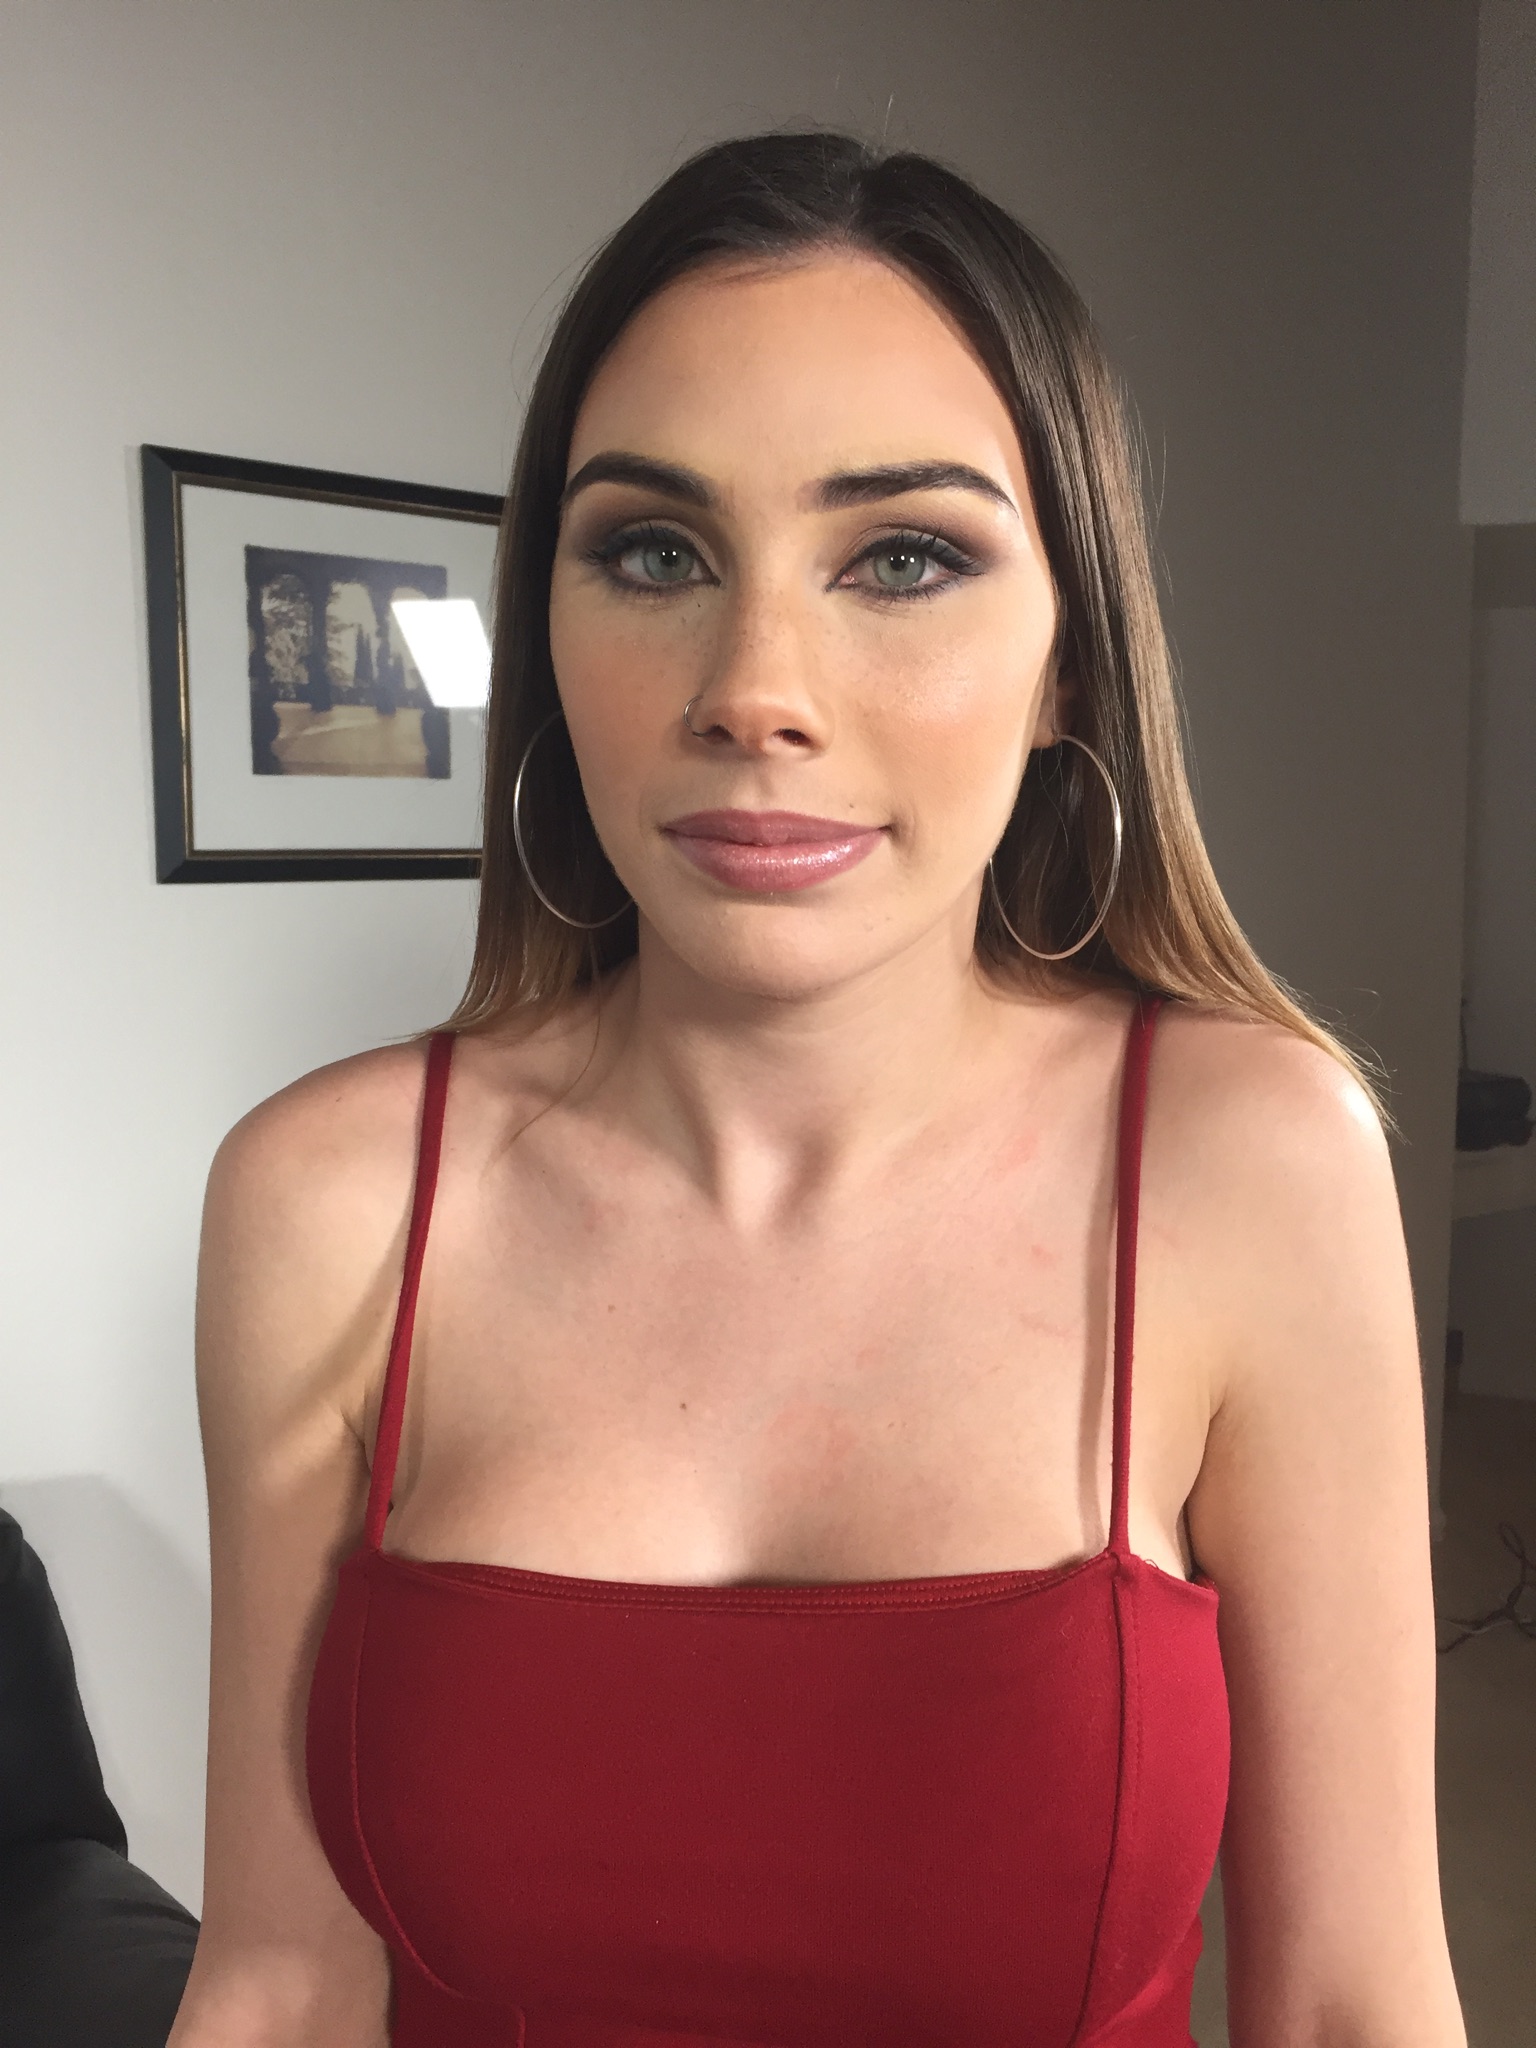 Backroom casting couch lexi